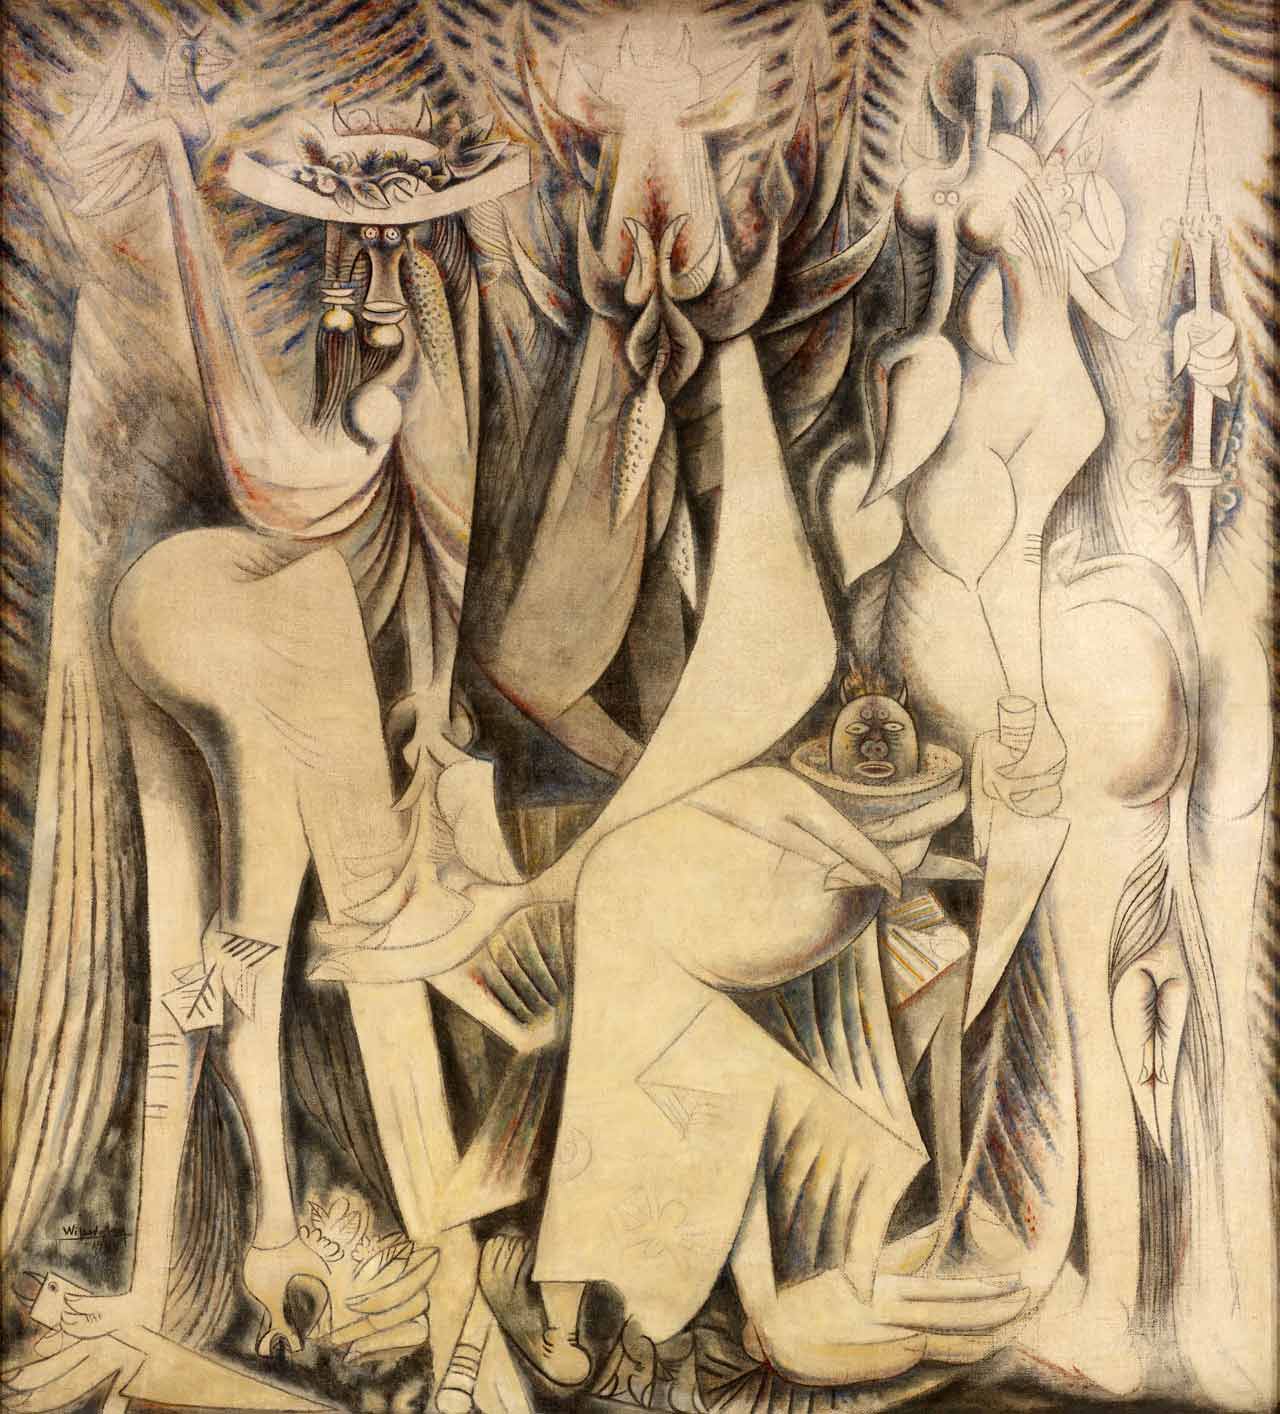 Wifredo Lam, The Eternal Presence (An Homage to Alejandro García Caturla), 1944, oil and pastel over papier mâché and chalk ground on bast fiber fabric, 85 ¼ x 77 1/ 8 inches (Rhode Island School of Design Museum)